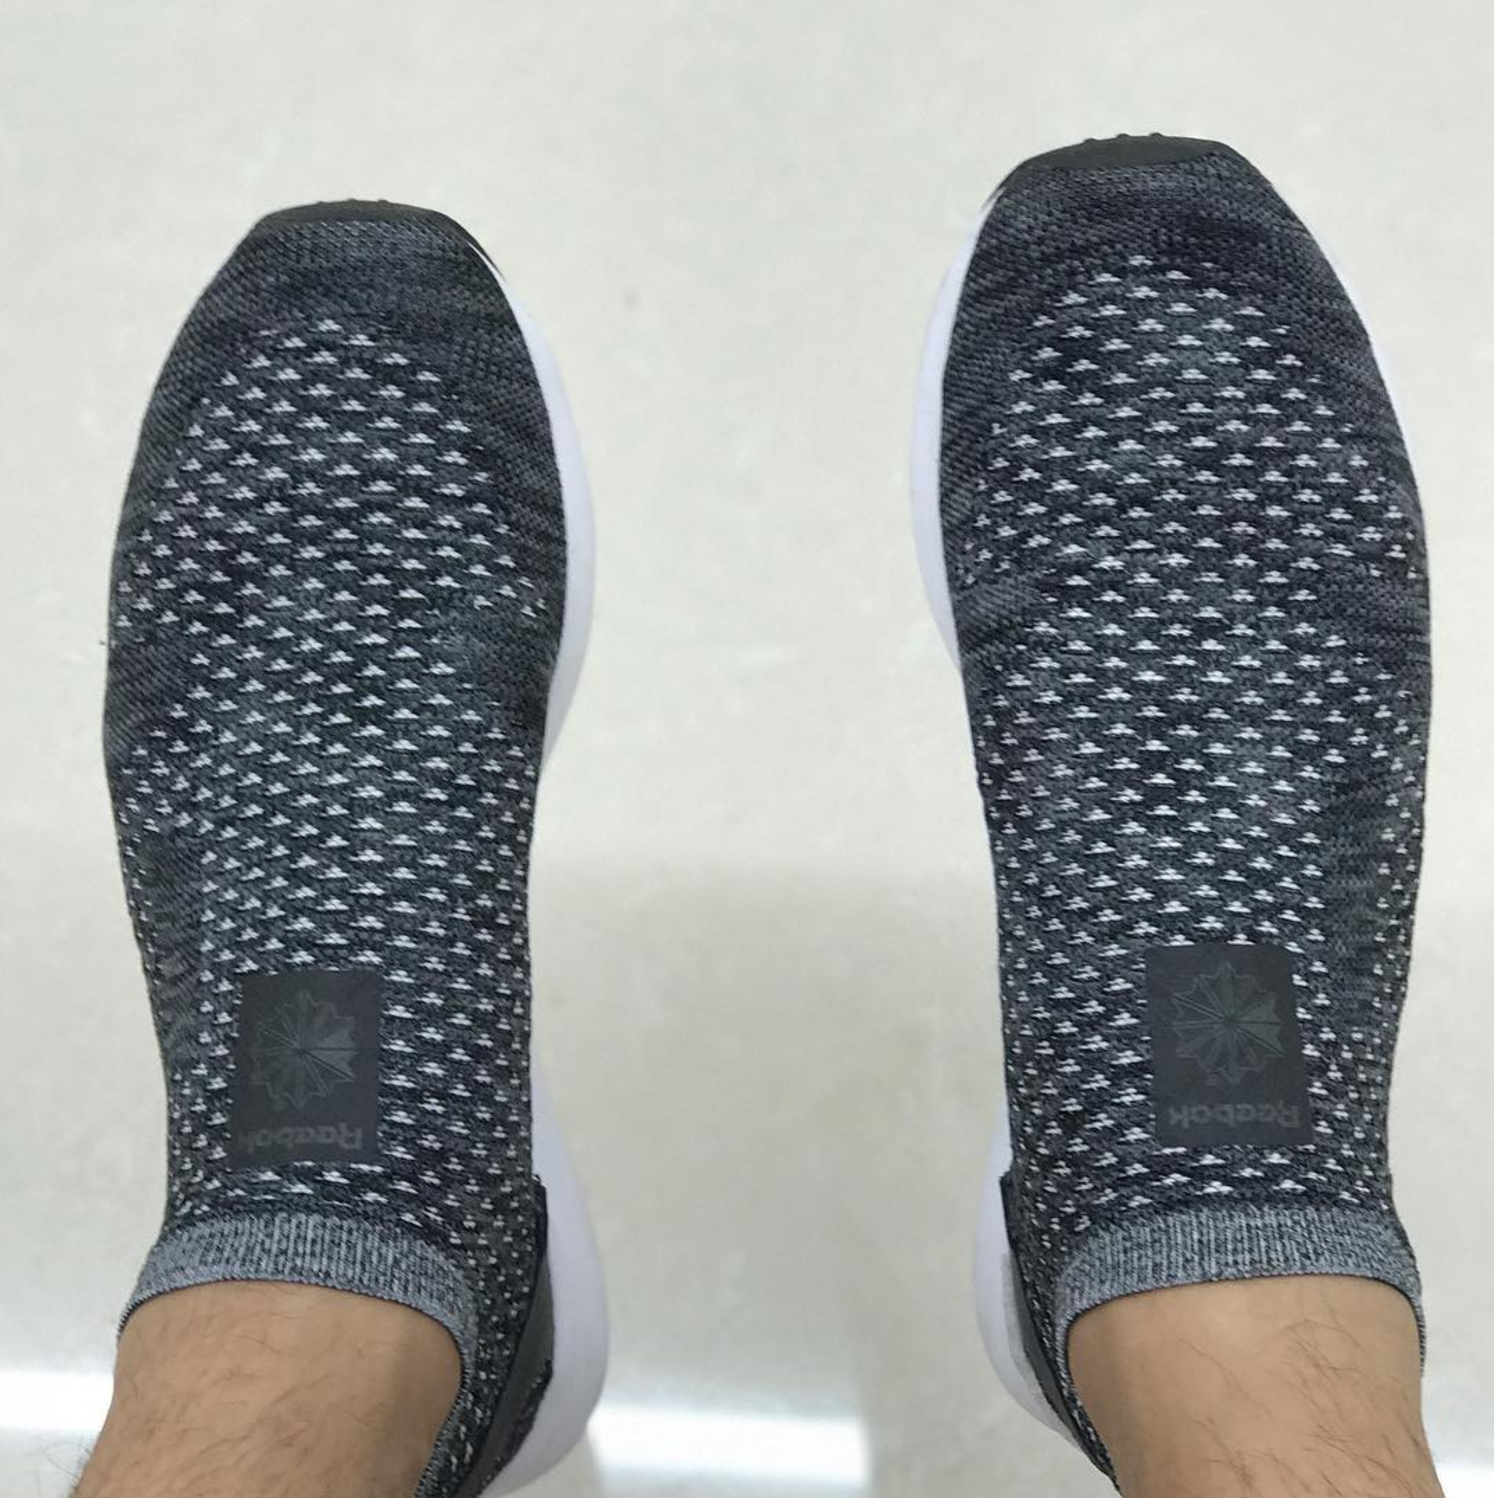 Someone Uncaged the Reebok Zoku Runner and it Looks Pretty Clean